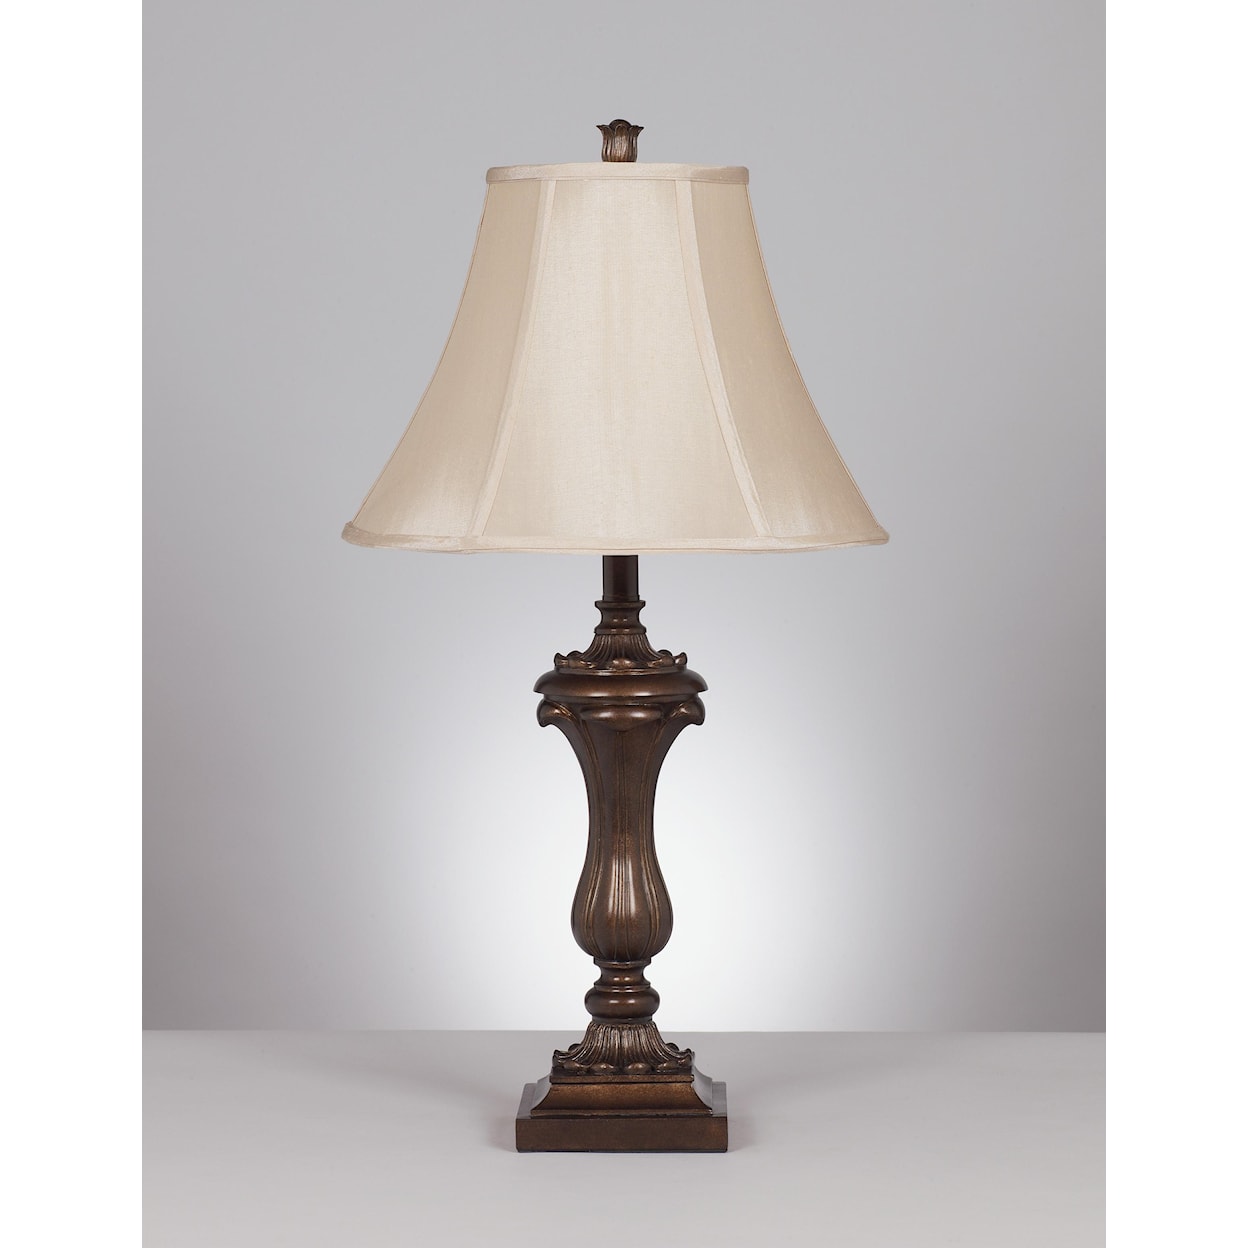 Signature Design by Ashley Lamps - Traditional Classics Set of 2 Mabel Table Lamps